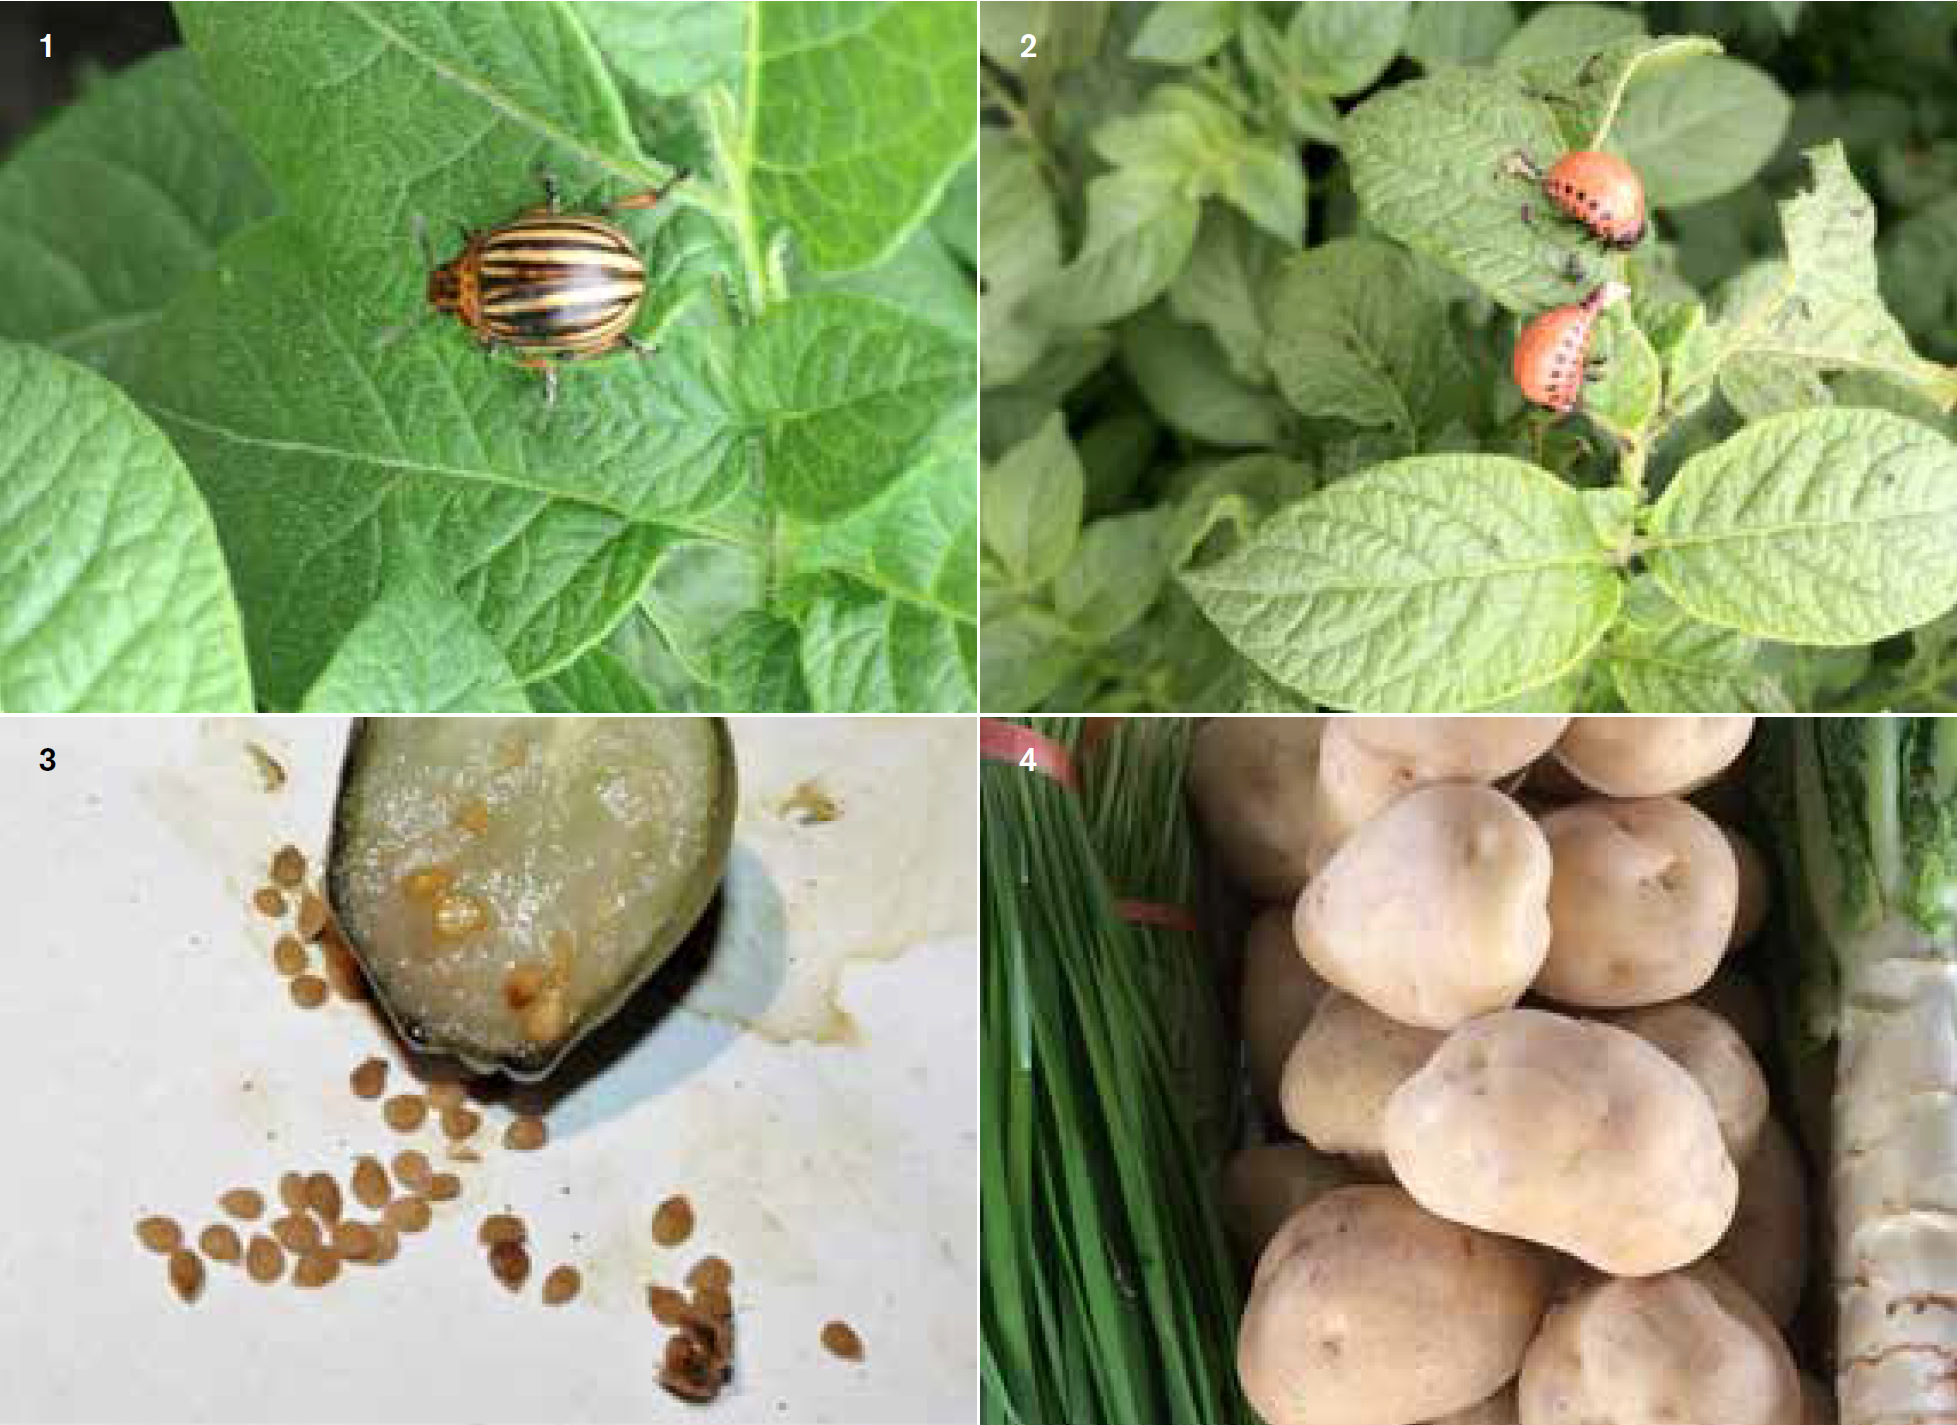 Winged insects such as Colorado beetle (1) and their larvae (2) and botanical potato seeds (3) and tubers (4) are examples of metamorphosis.